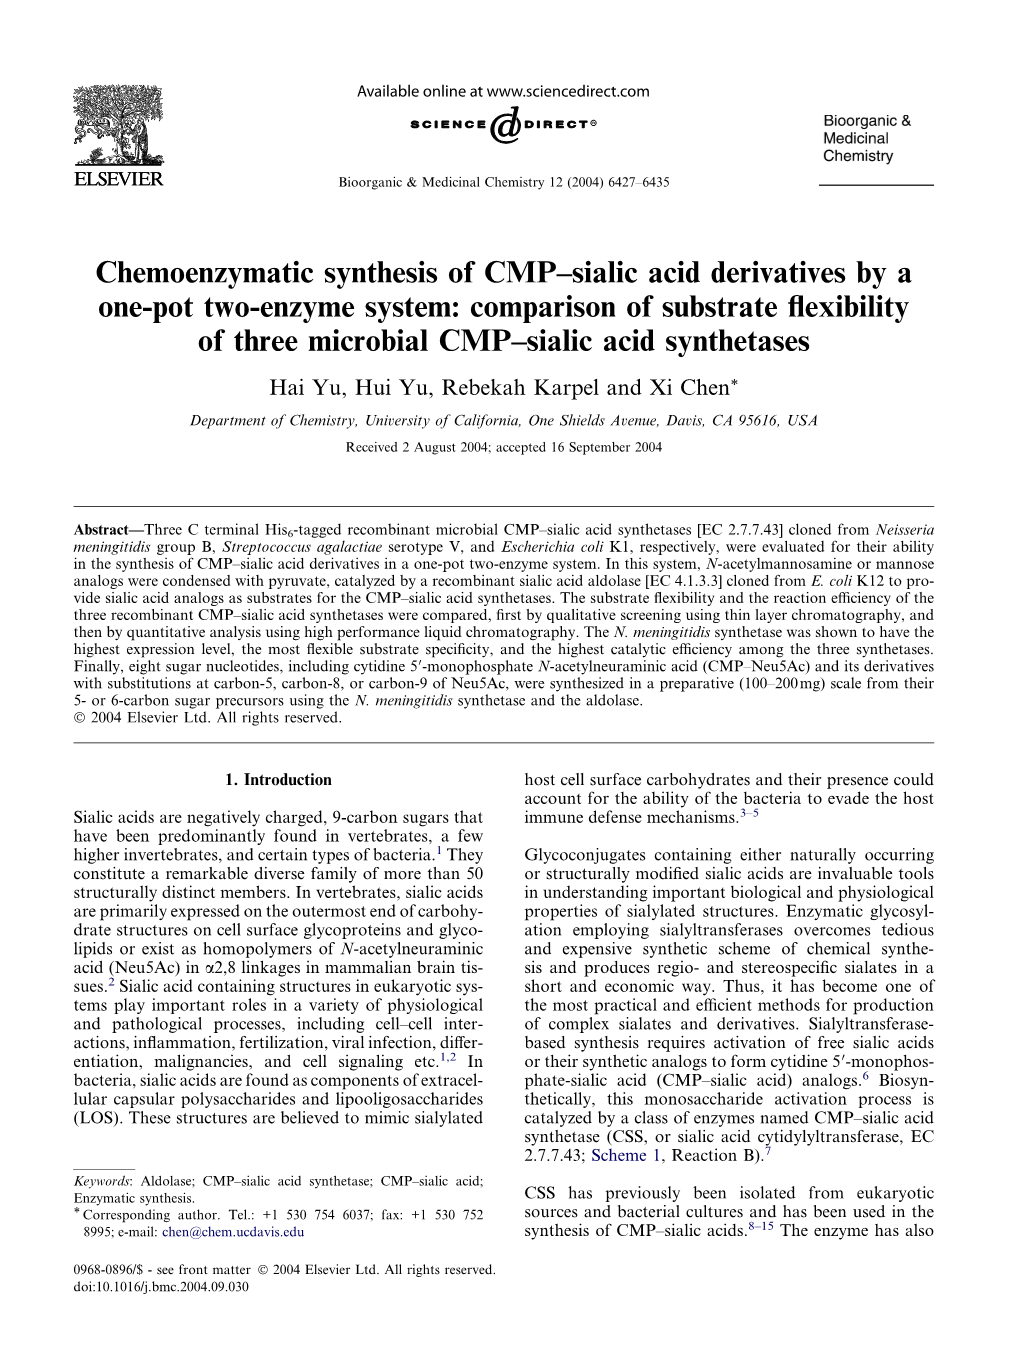 Chemoenzymatic Synthesis of CMP–Sialic Acid Derivatives by a One-Pot